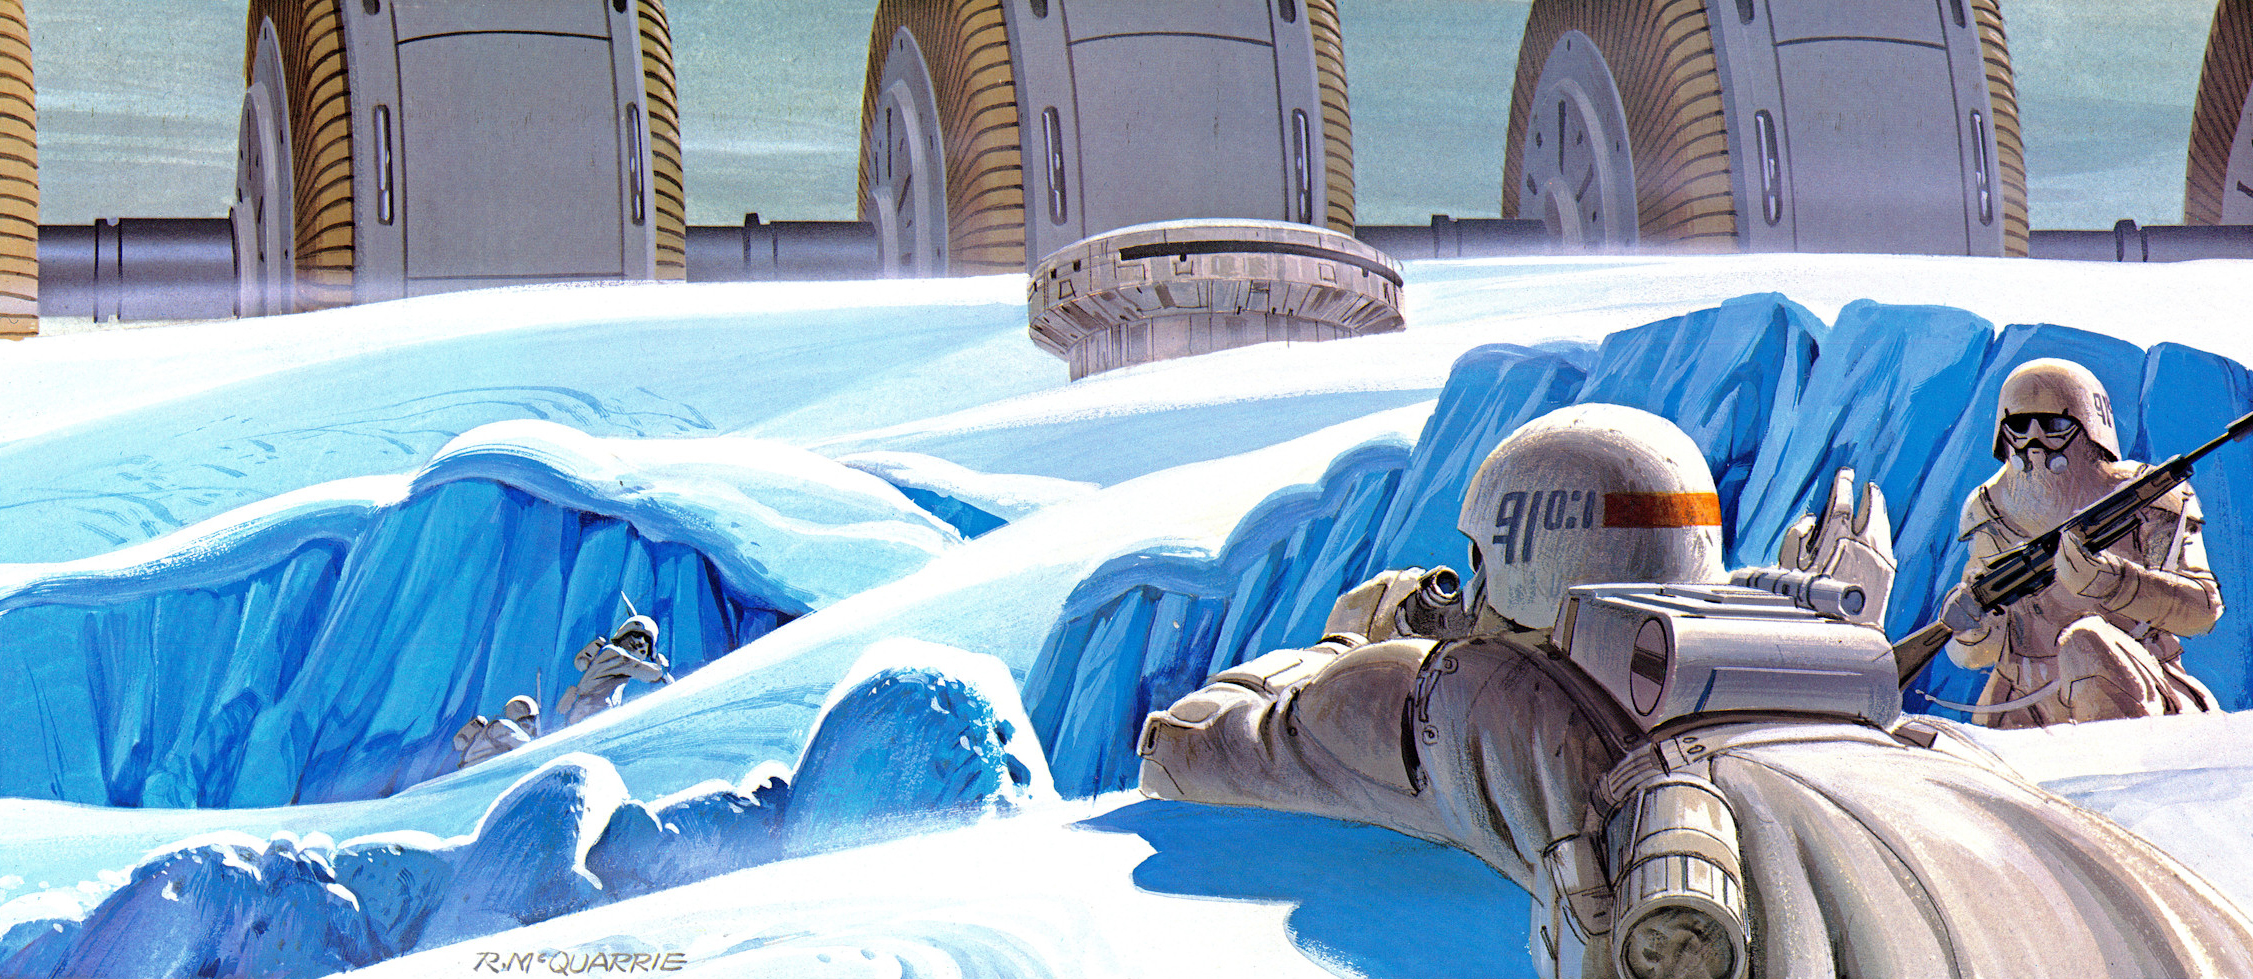 Frozen Starwars AT-ST in Hoth Setting 